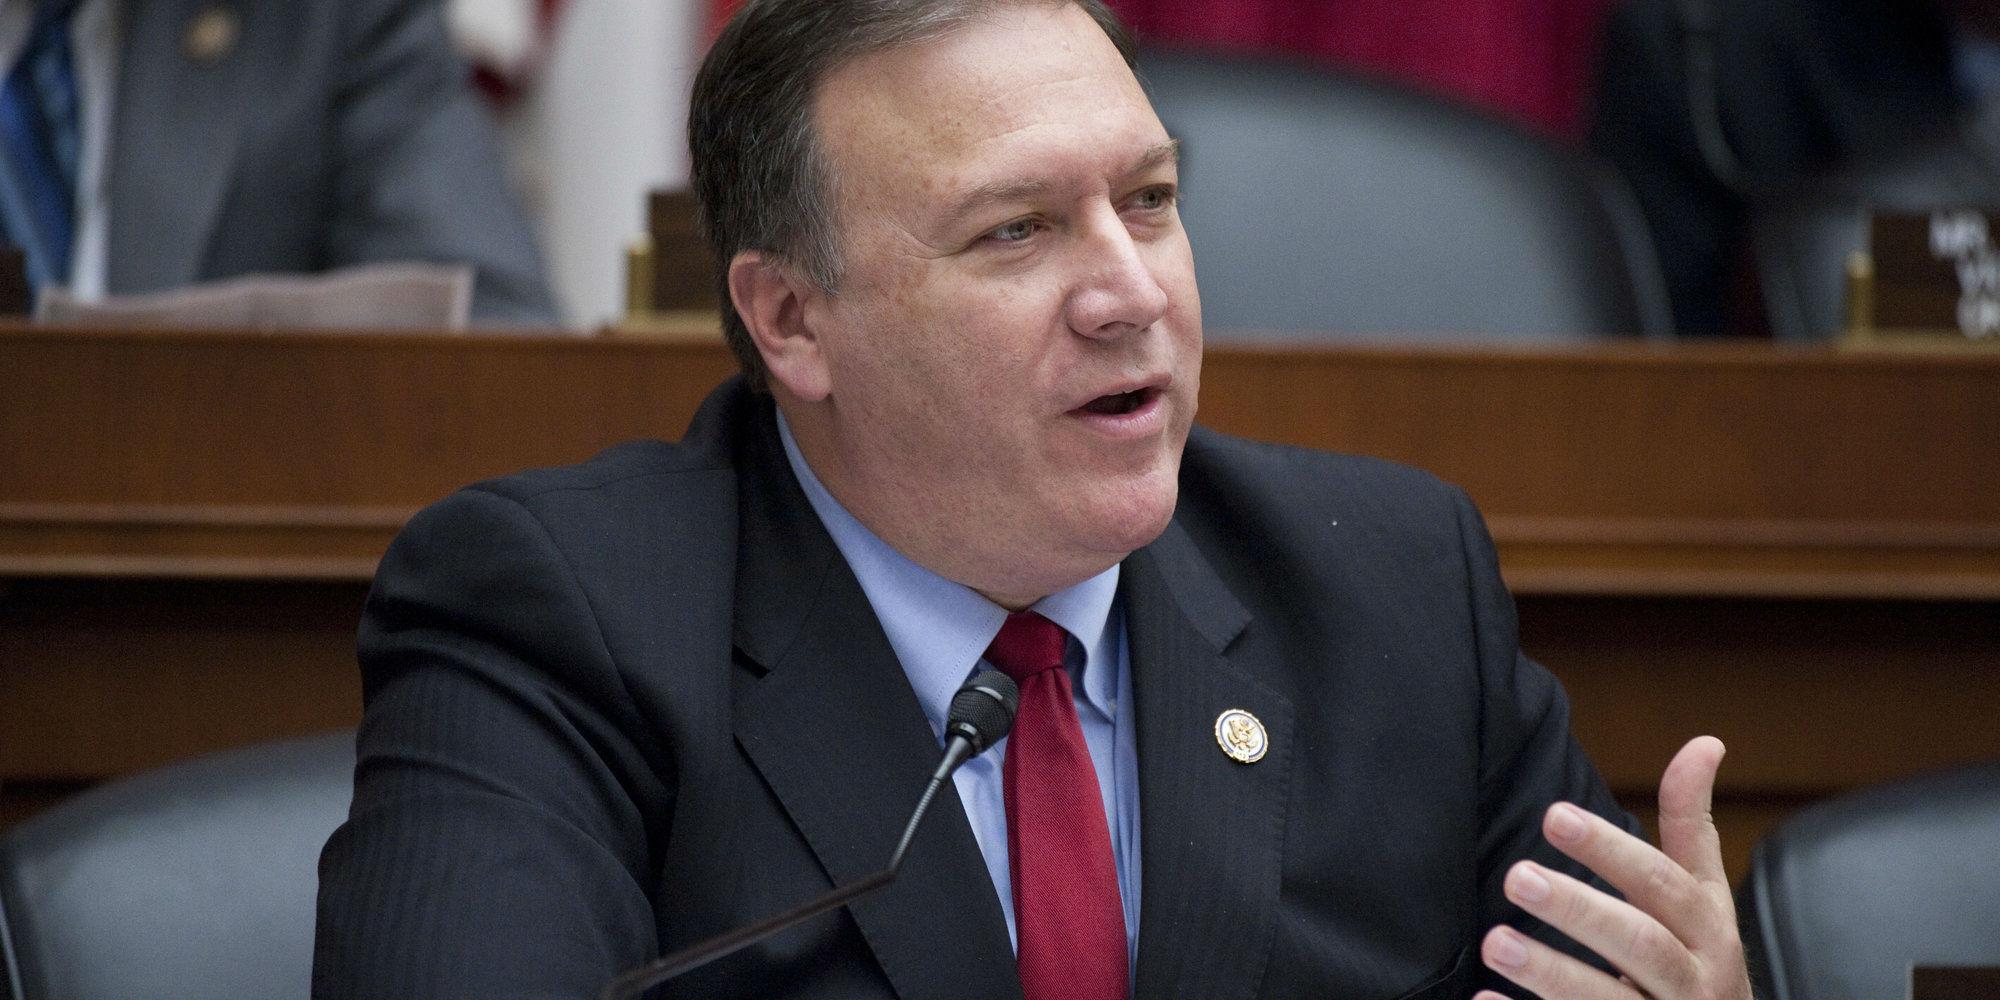 Congressman Mike Pompeo is known as a vocal opponent of President Obama's nuclear deal